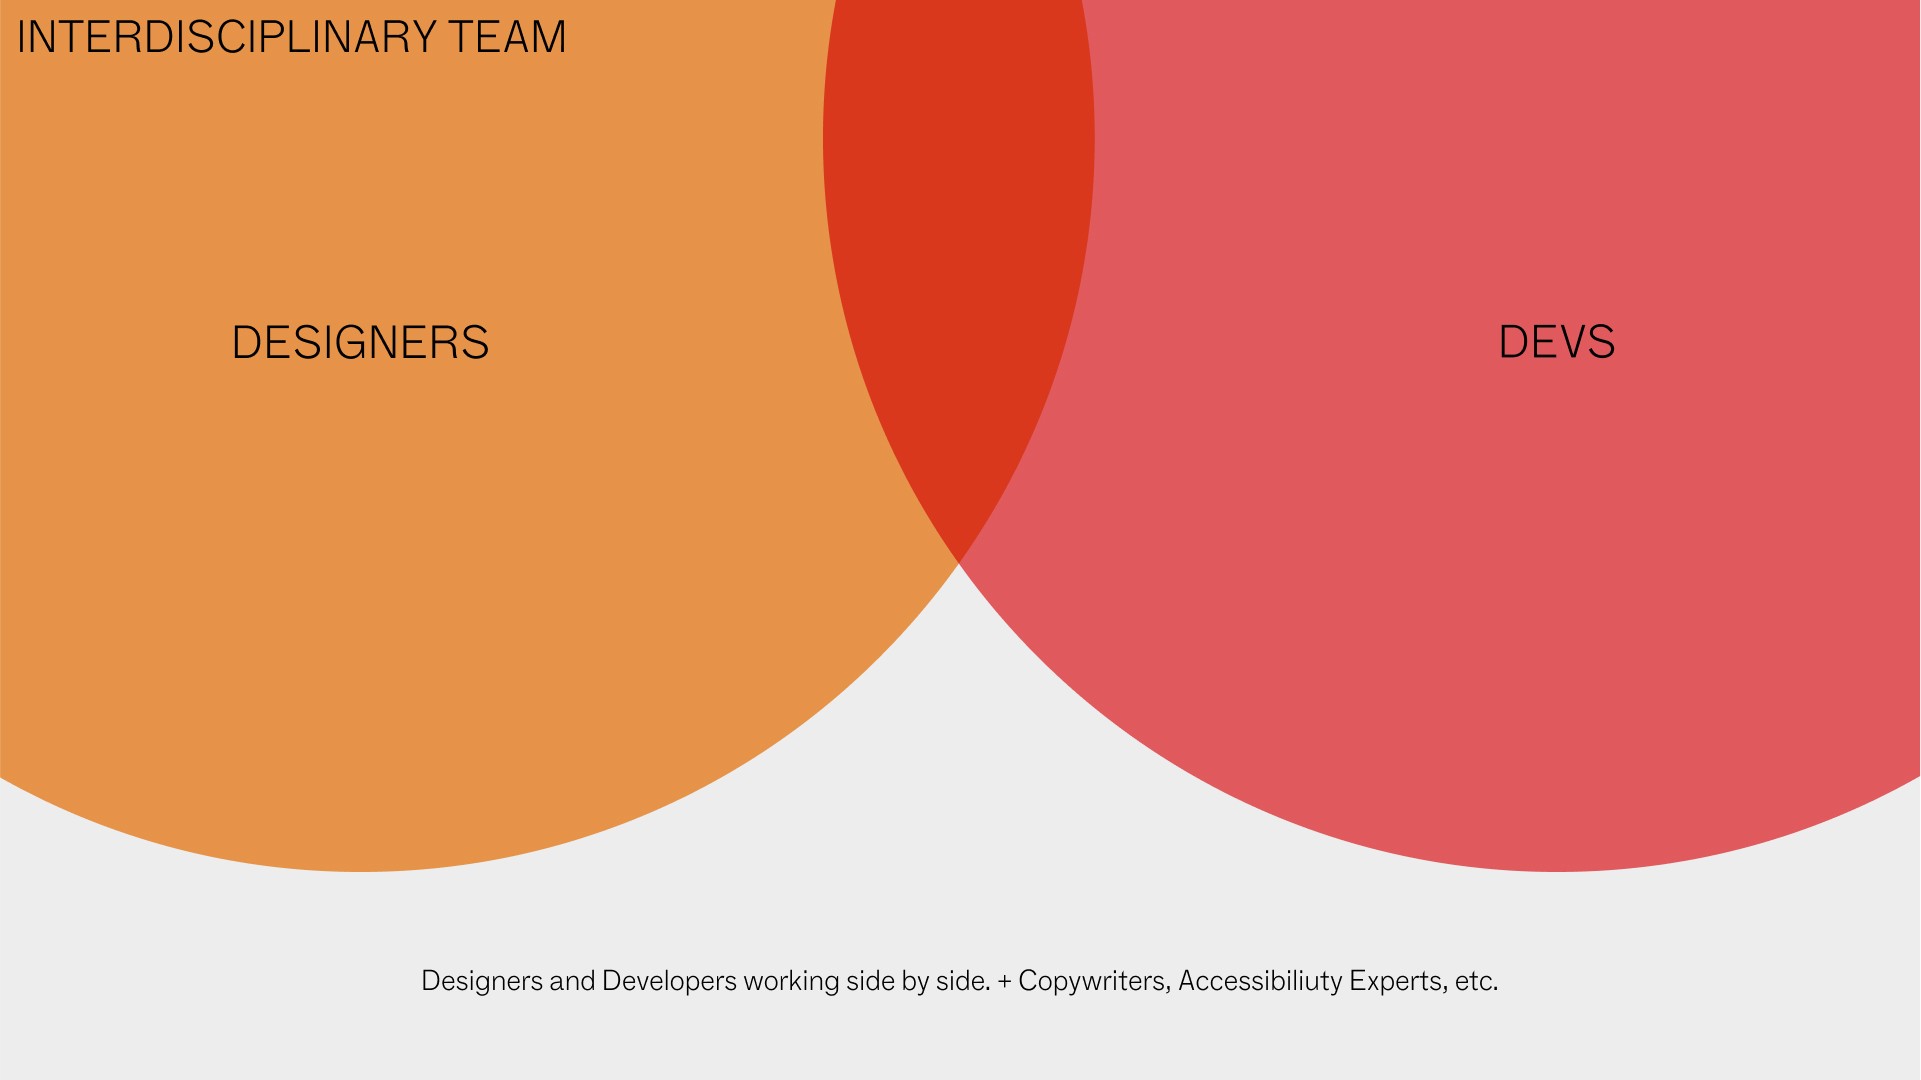 Venn diagram of two meeting circles: designers and developers.